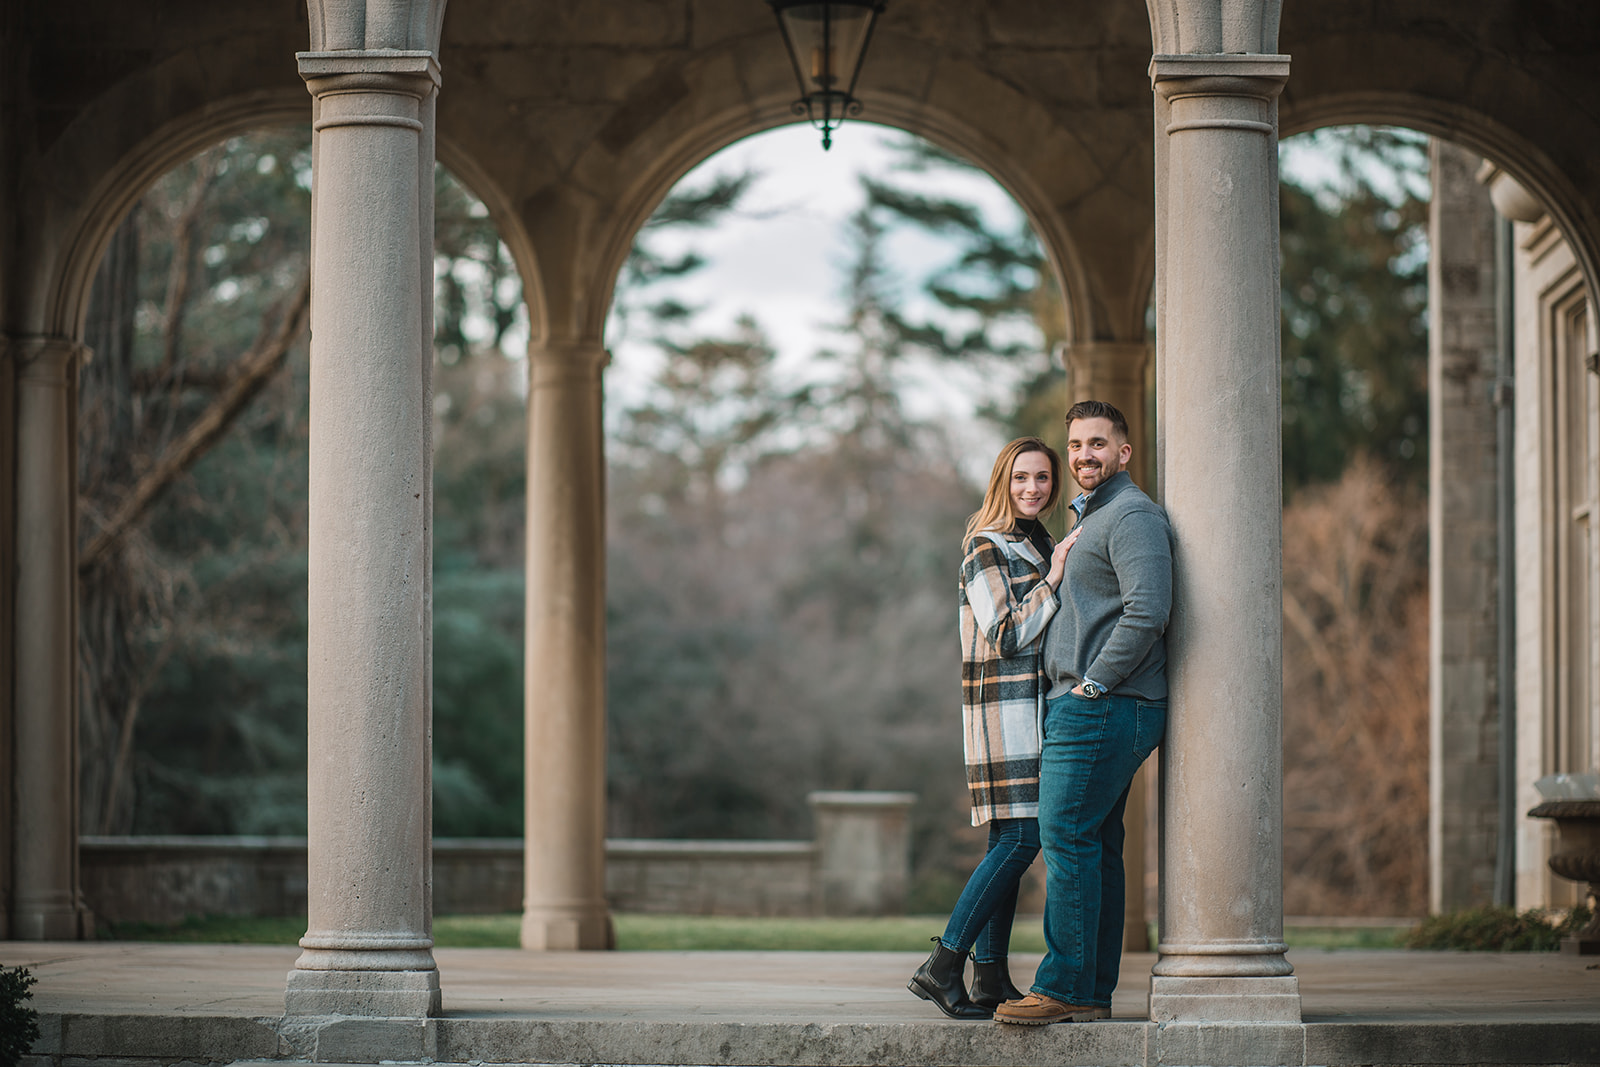 Engagement photos at Planting Fields